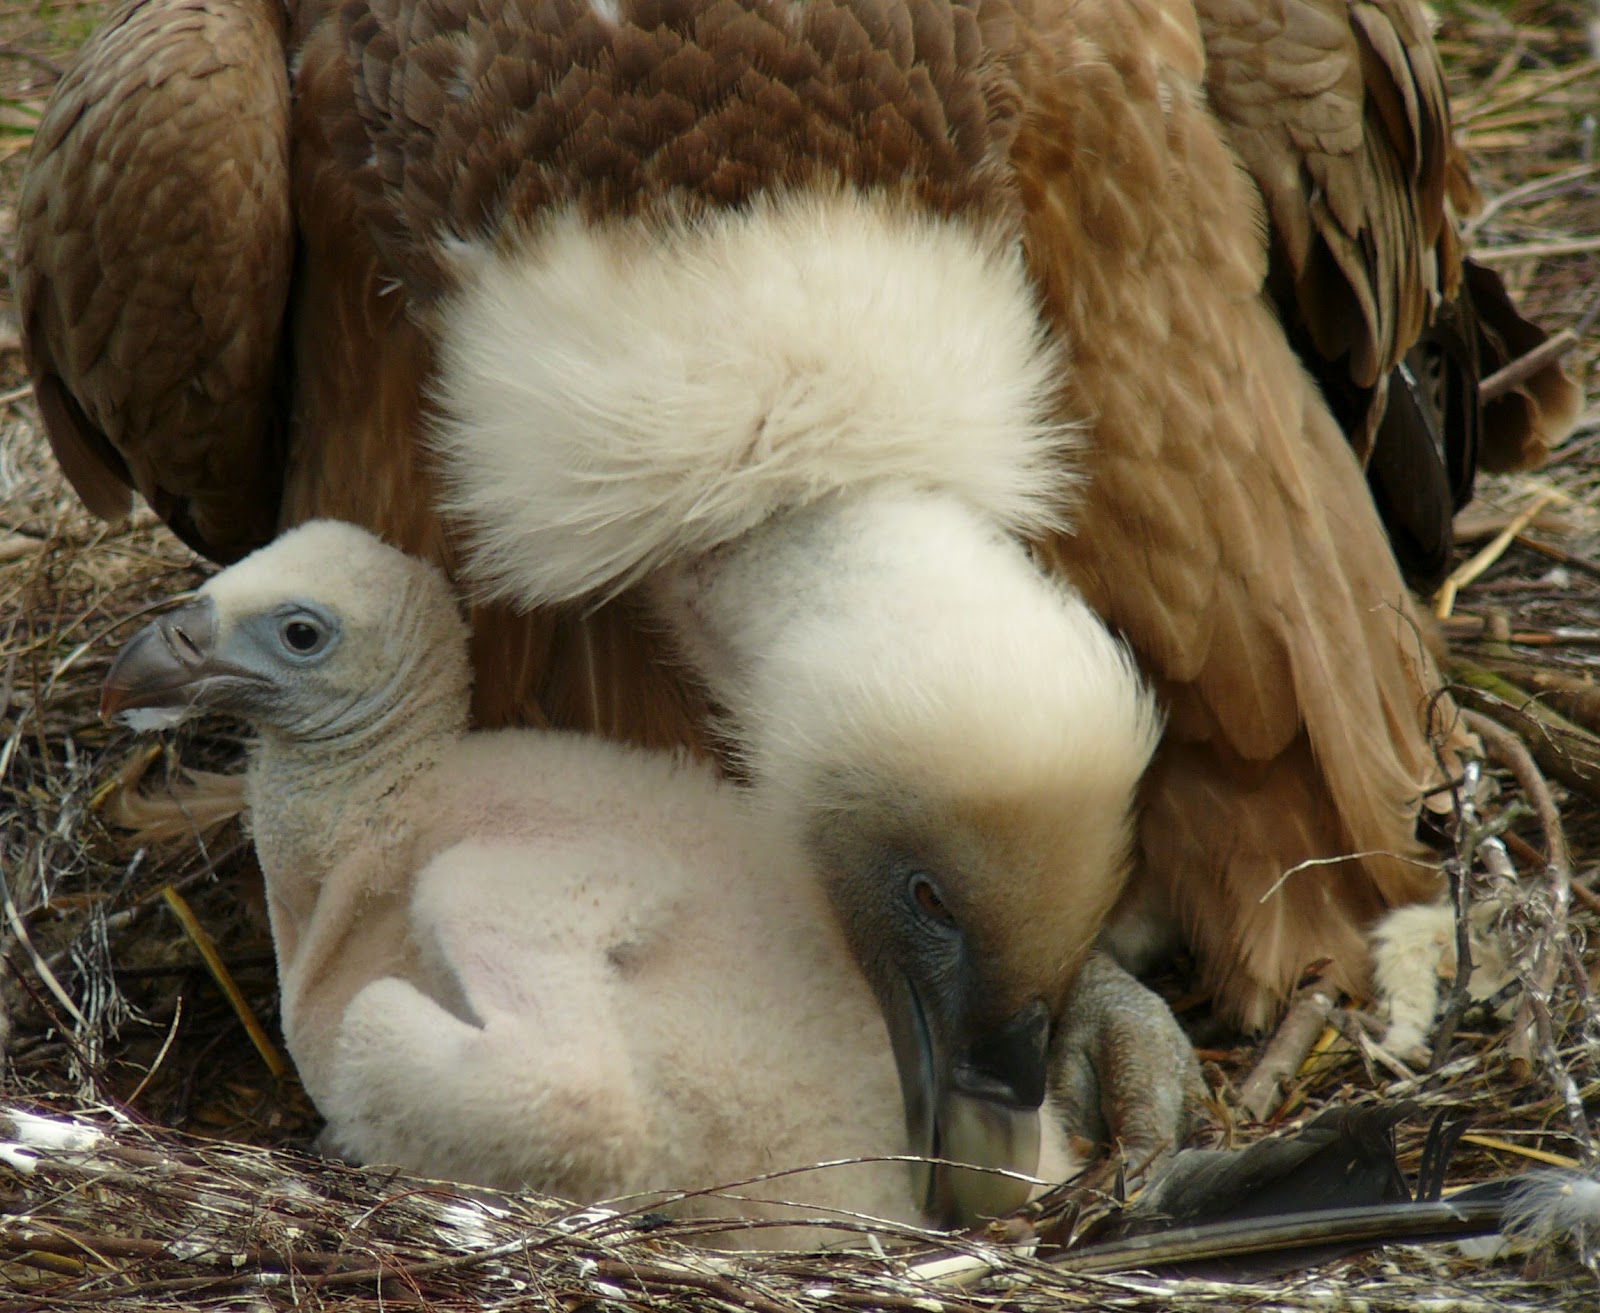 Fascinated by Vultures: 21 days old Eurasian Griffon Vulture chick